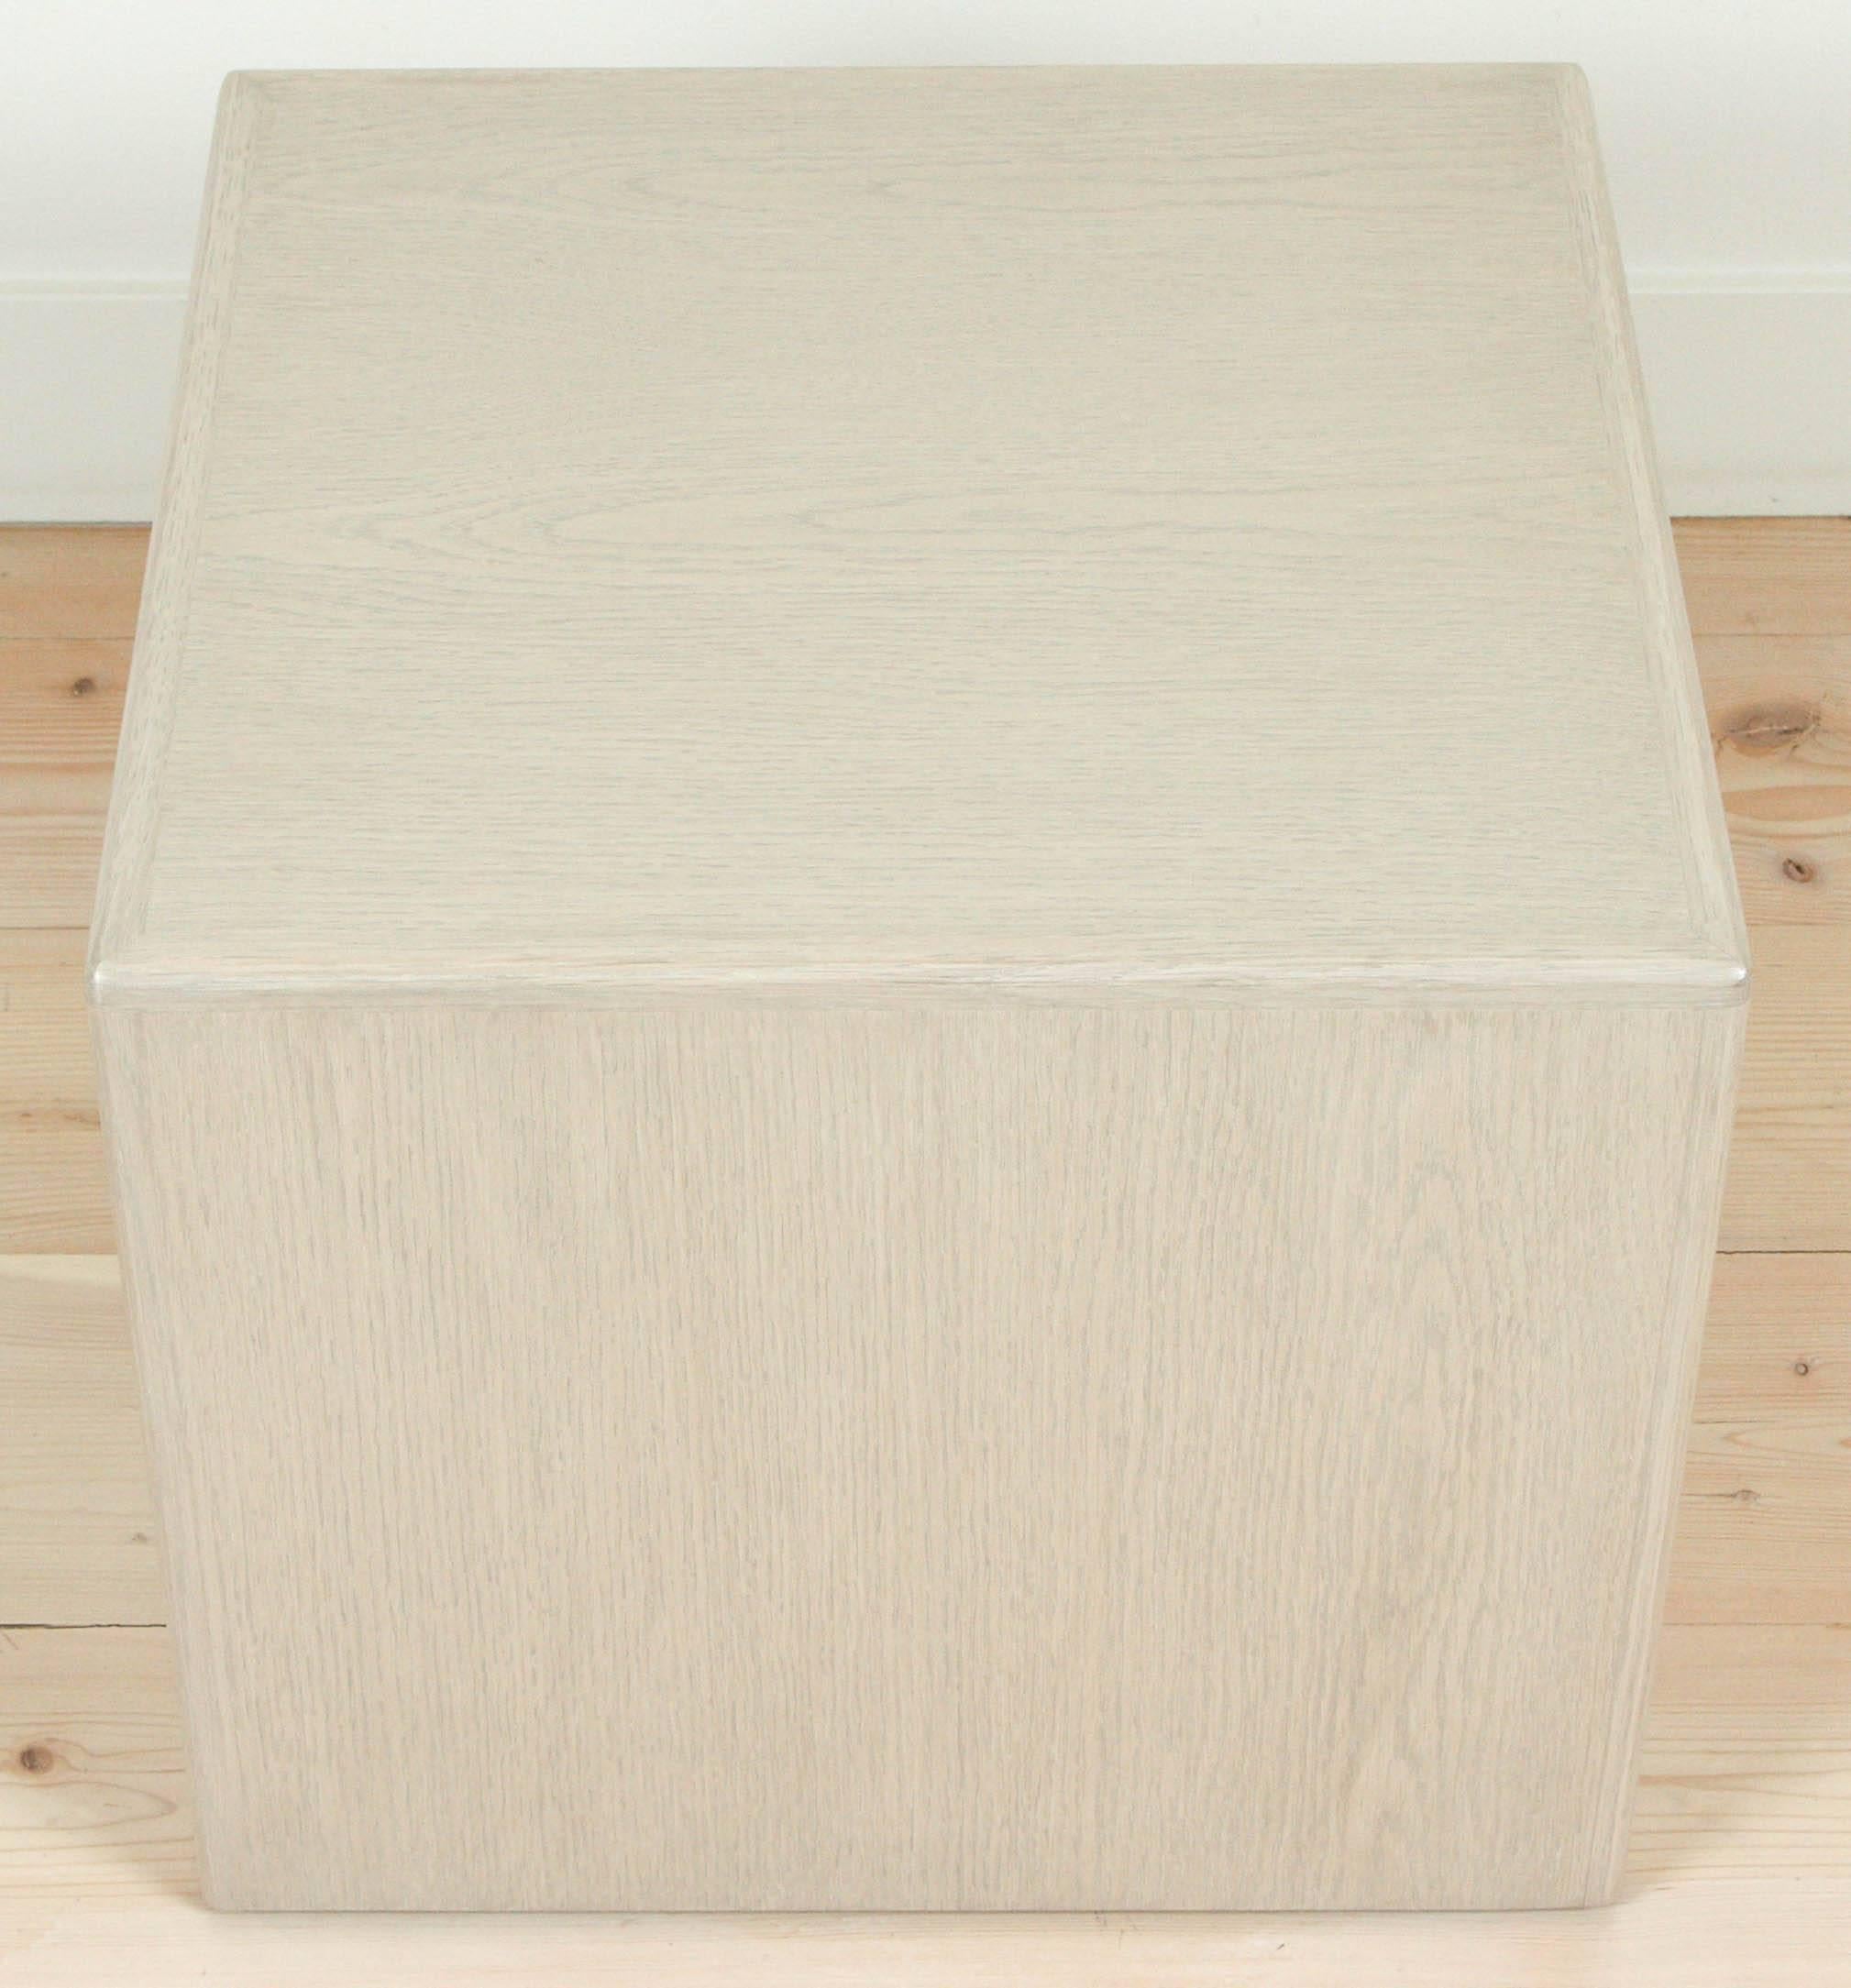 The Wood Cube Table is a cube-shaped side table that is covered on five sides with American Walnut or White Oak with solid wood edge banding and a 3/4″ floating inset base. This pair pictured in Whitewashed Oak.

Available to order in various